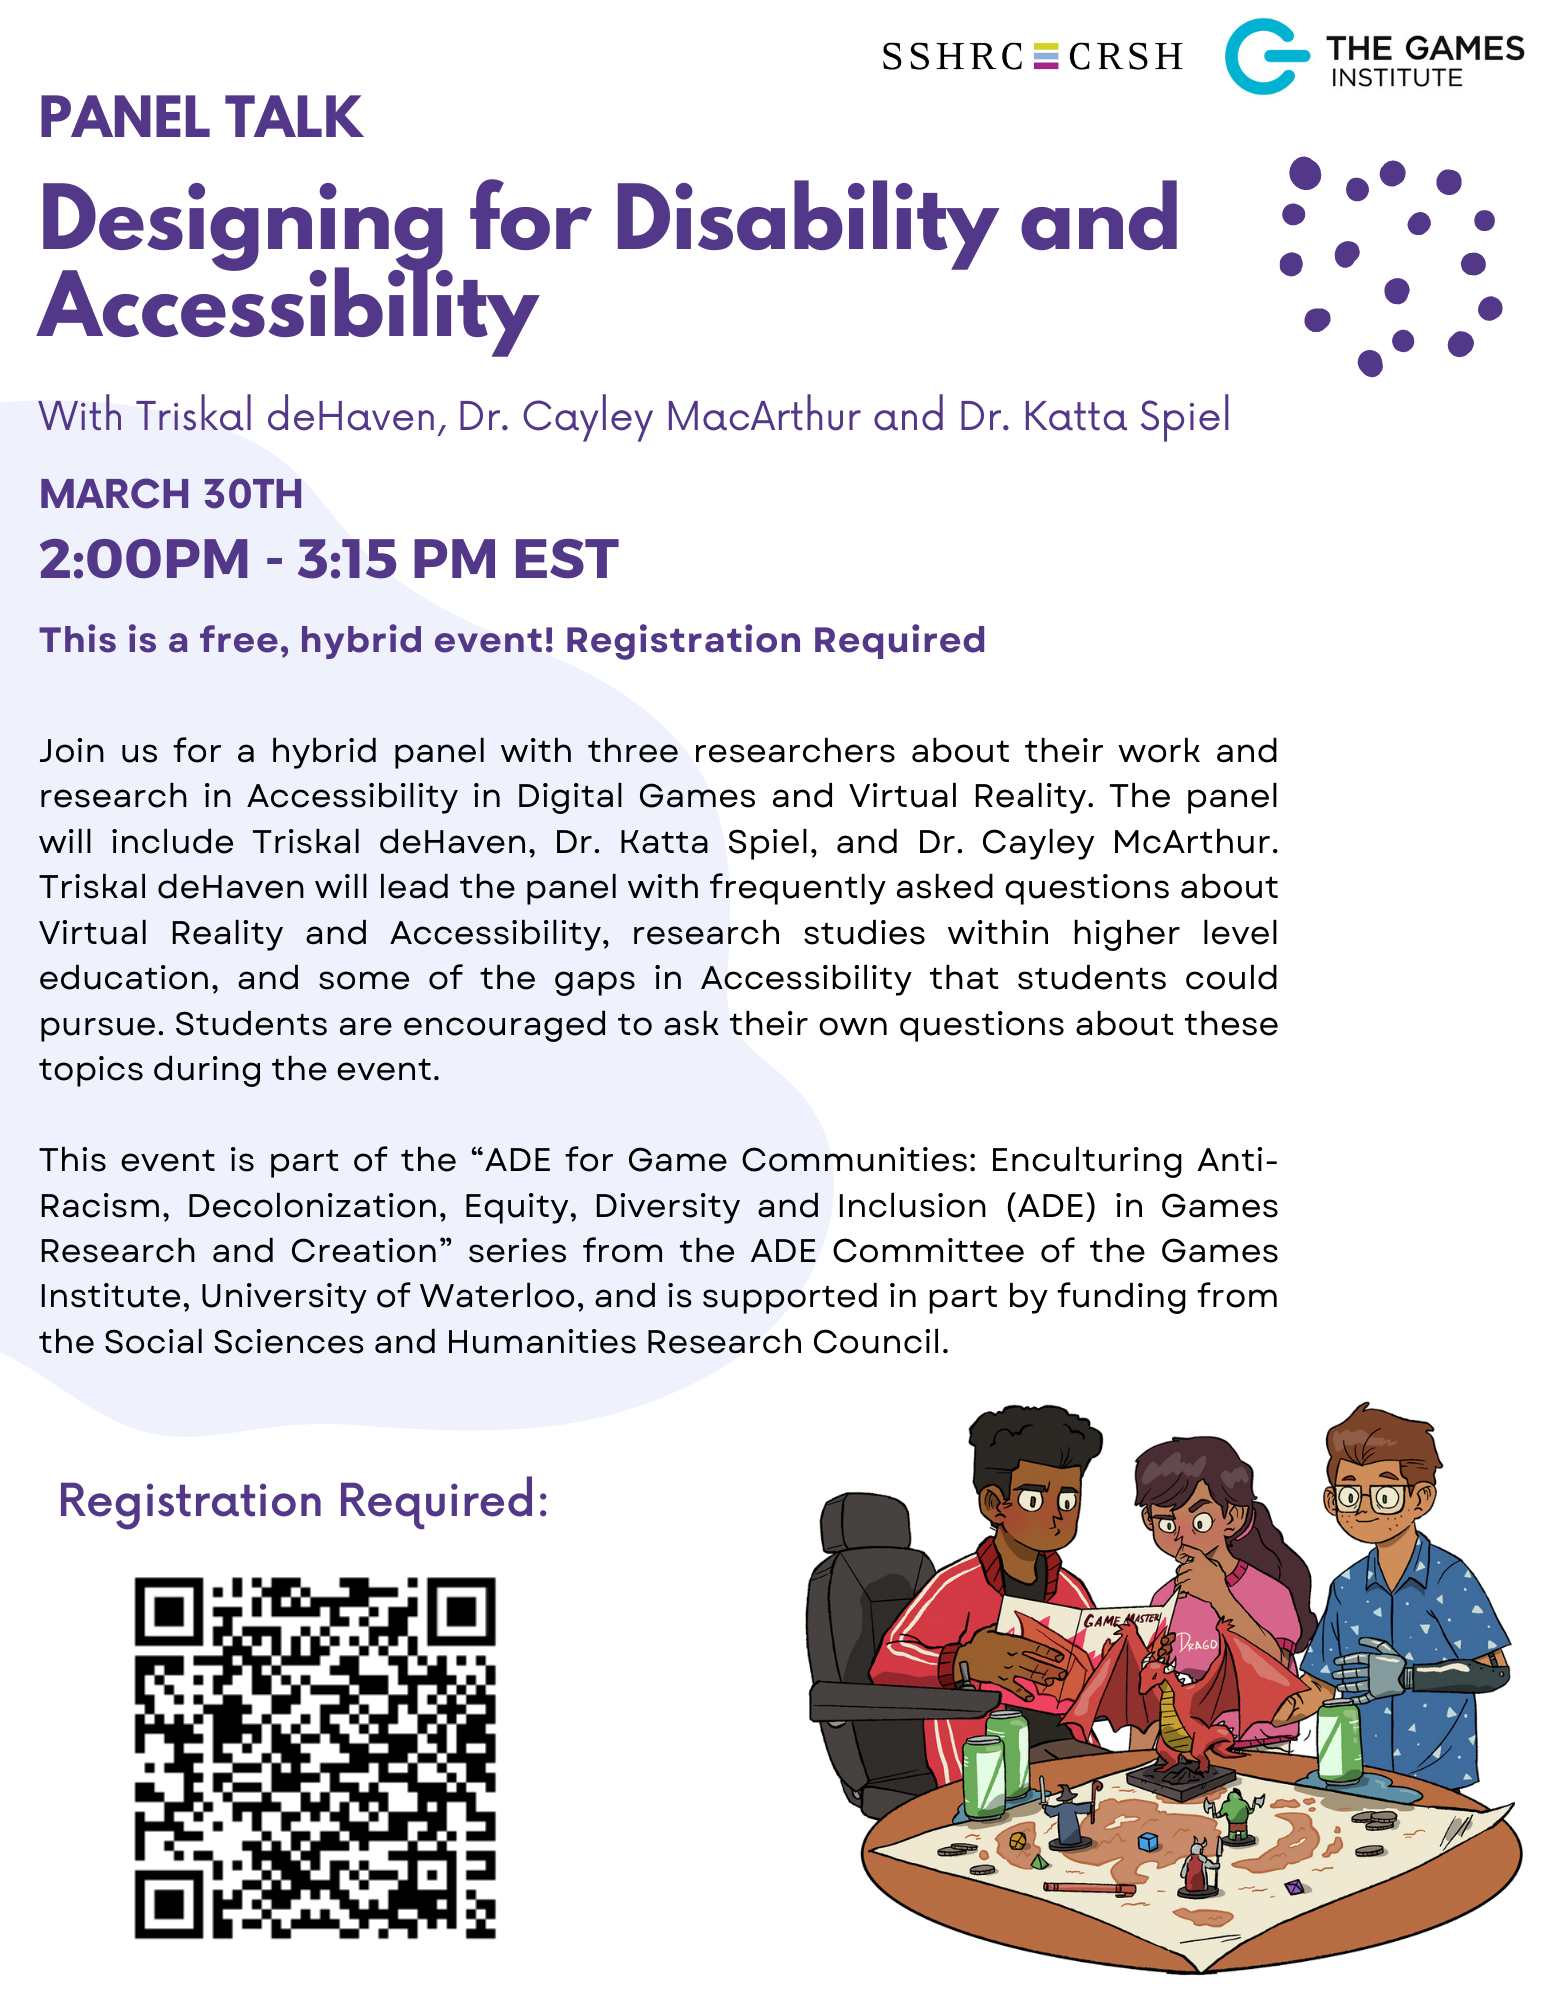 Promotional poster fo "Panel on Designing for Disability and Accessibility"